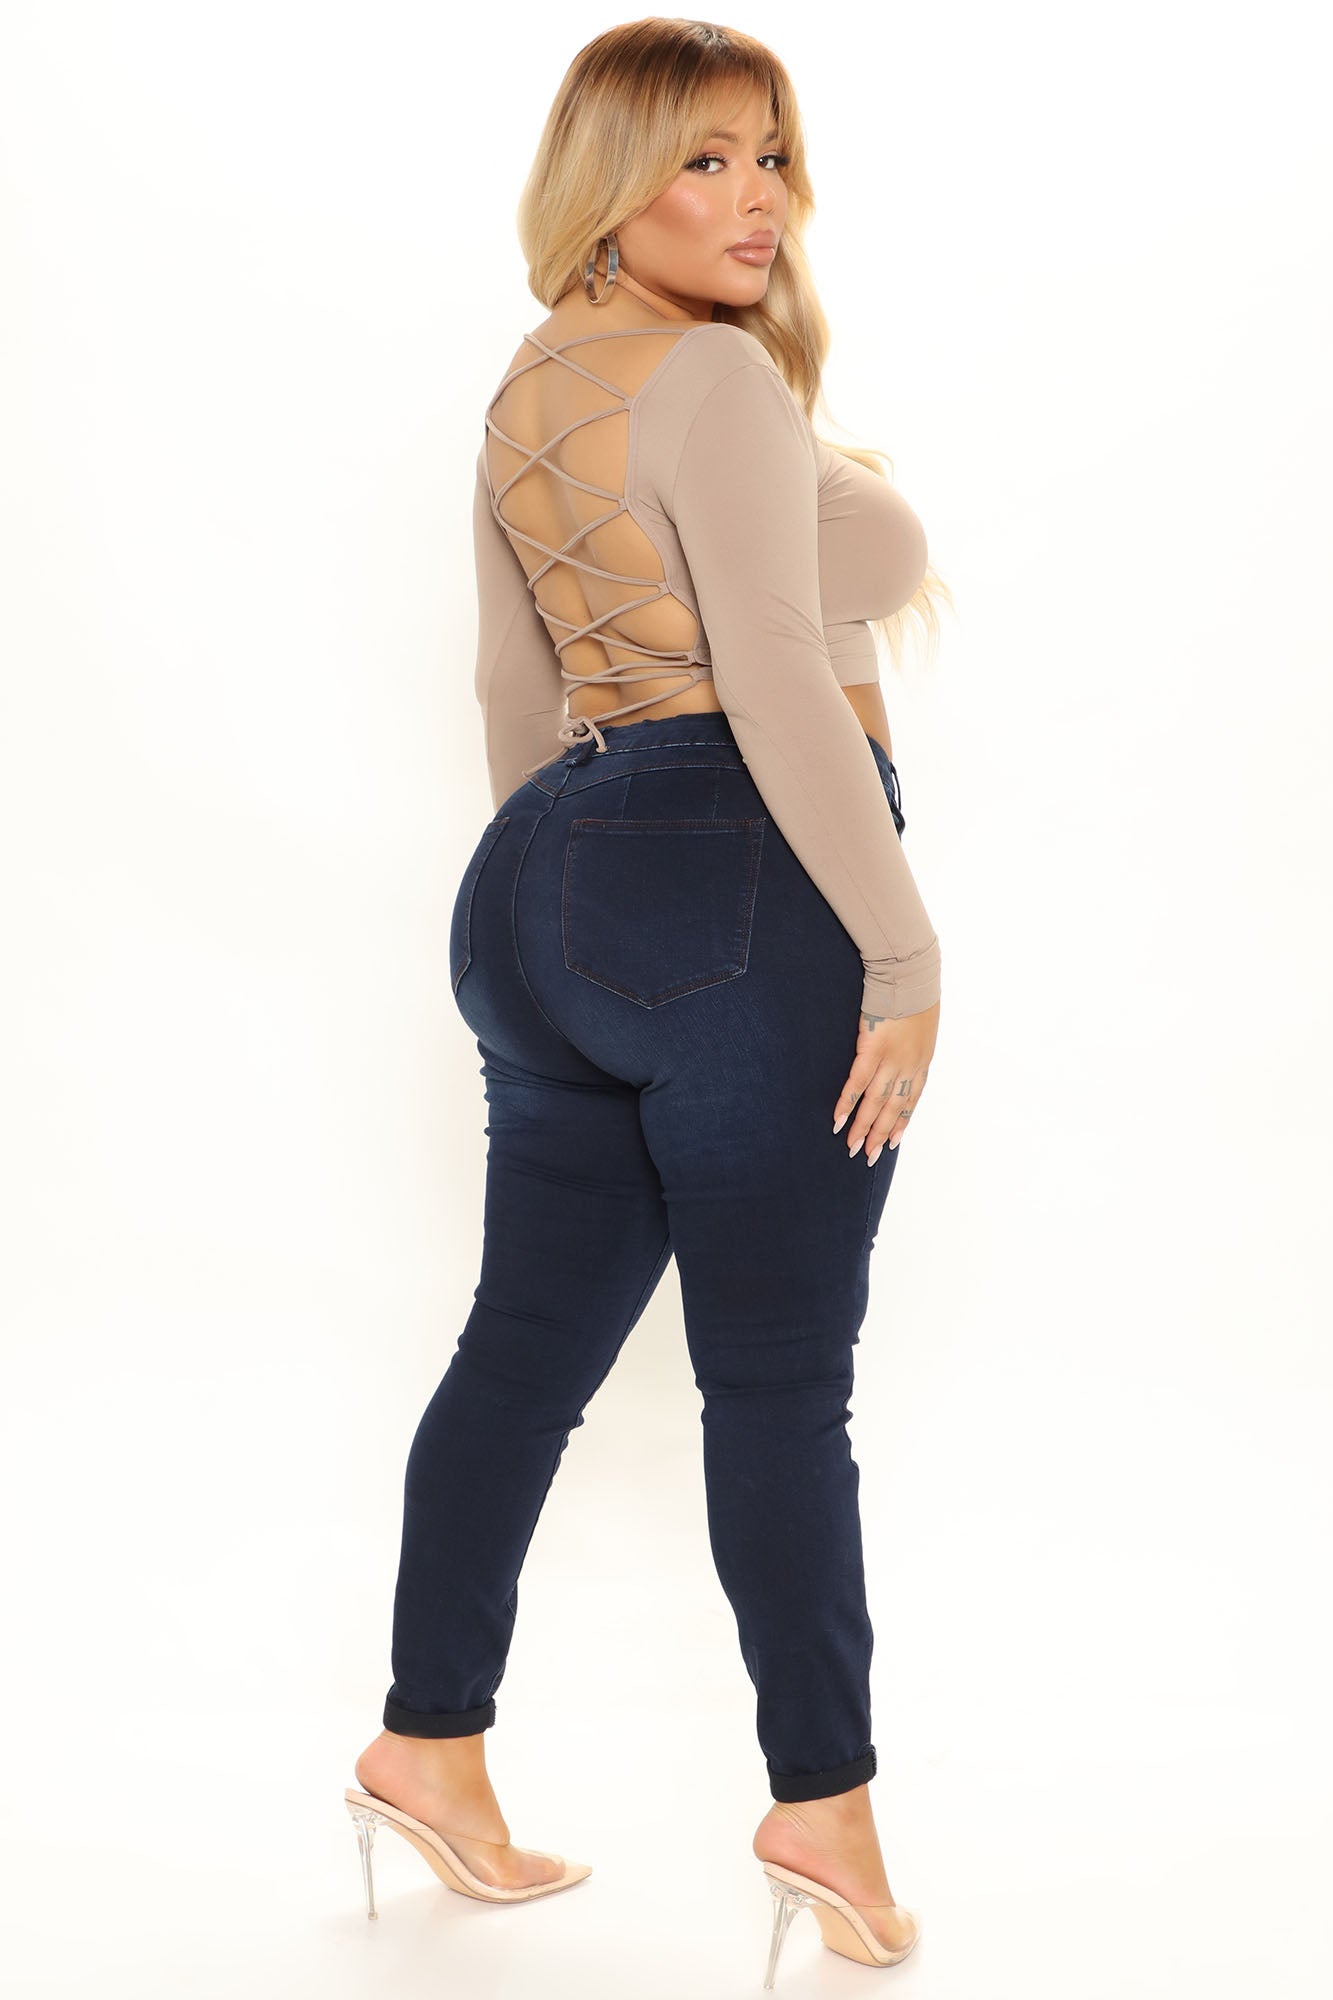 Check Out That Booty Lifting Skinny Jeans - Dark Wash